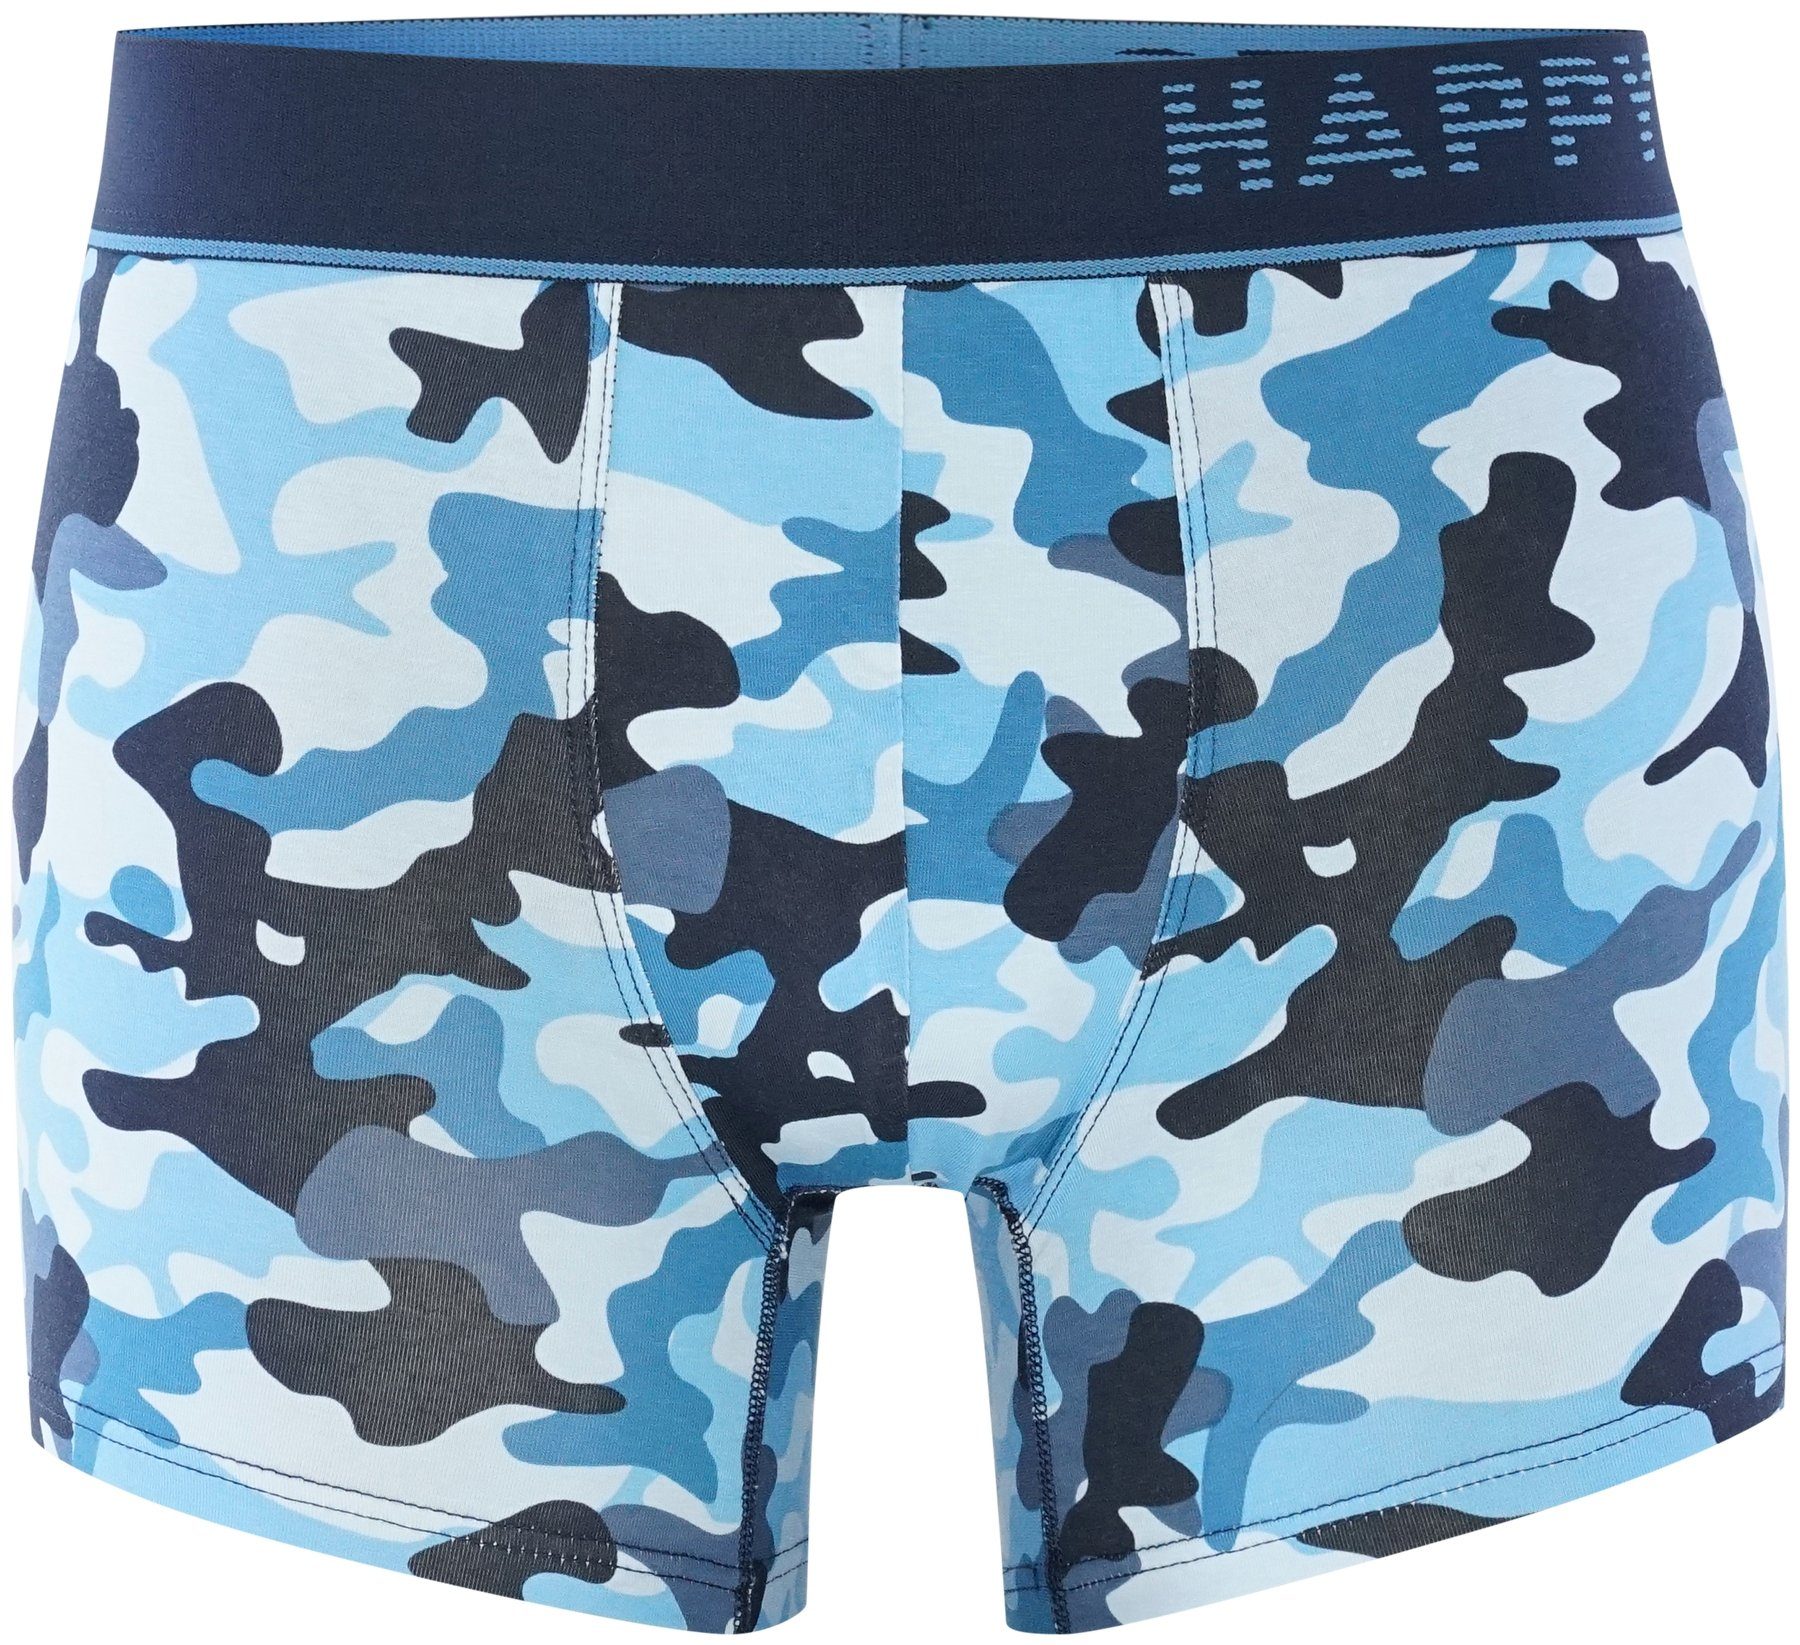 HAPPY SHORTS Retro Pants 2-Pack Camouflage